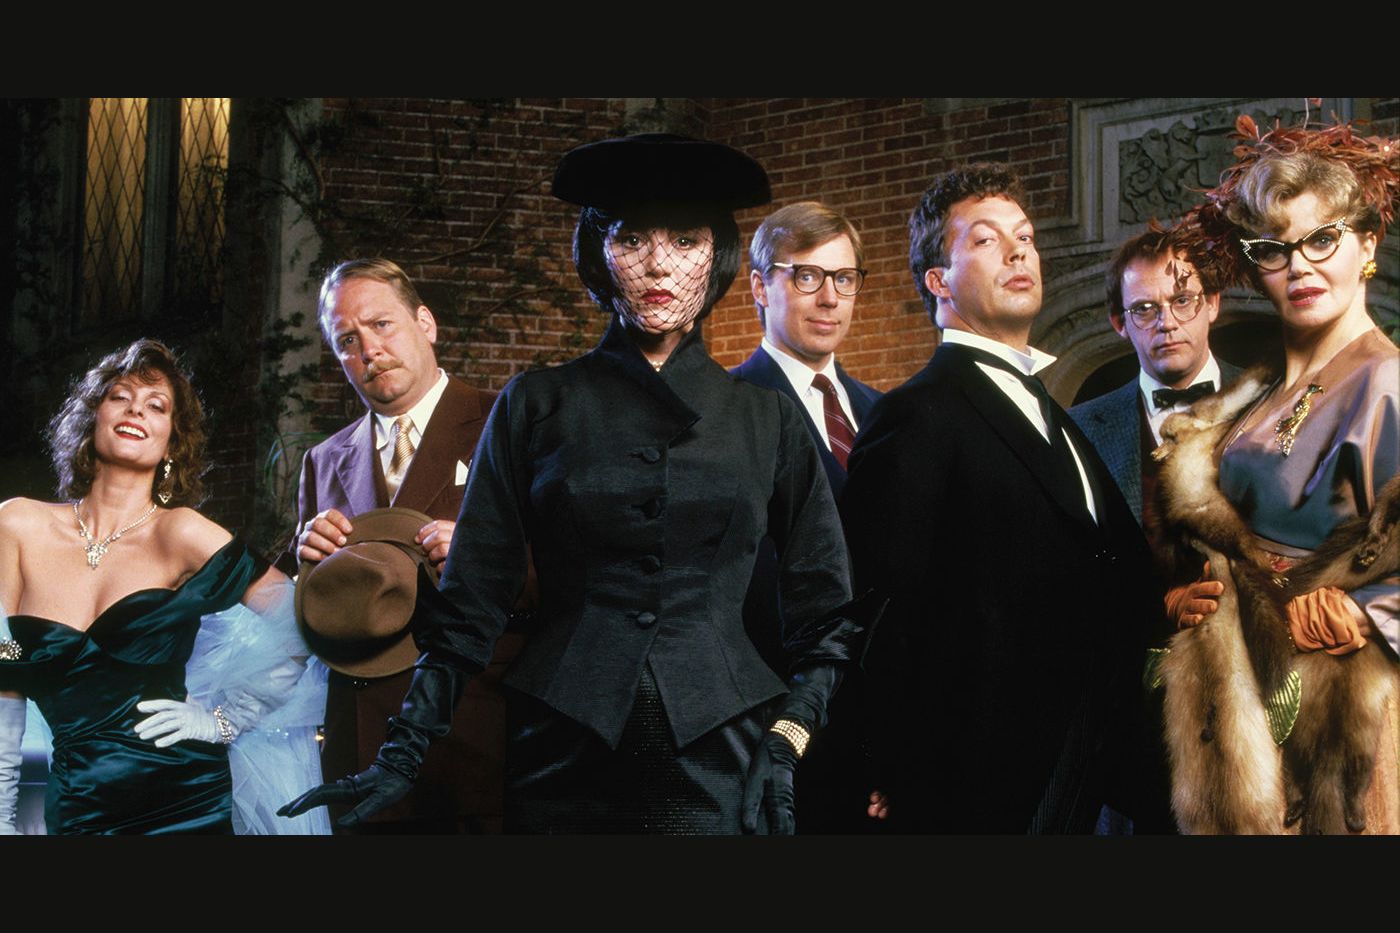 How Well Do You Remember The Movie 'Clue'?